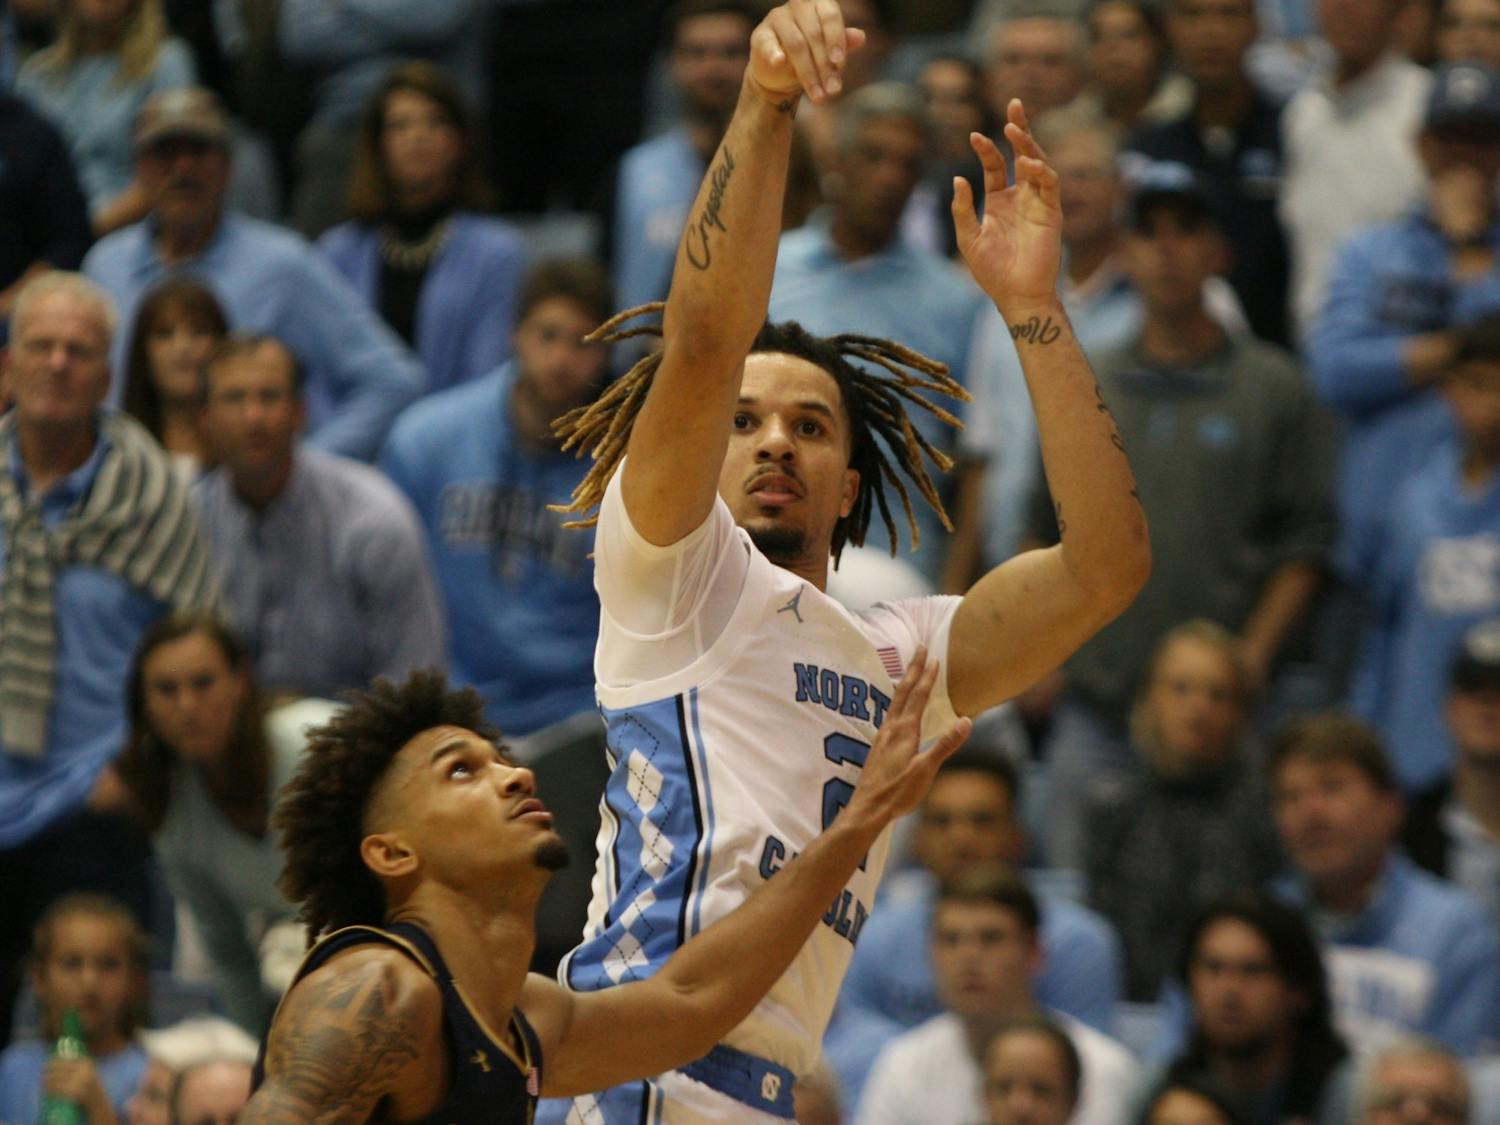 UNC guard Cole Anthony (2) shoots over Notre Dame's Prentiss Hubb (3) on Wednesday, Nov. 6, 2019 in the Dean E. Smith Center. Anthony finished the game with 34 points and 11 rebounds. The Tar Heels beat the Fighting Irish 76-65.